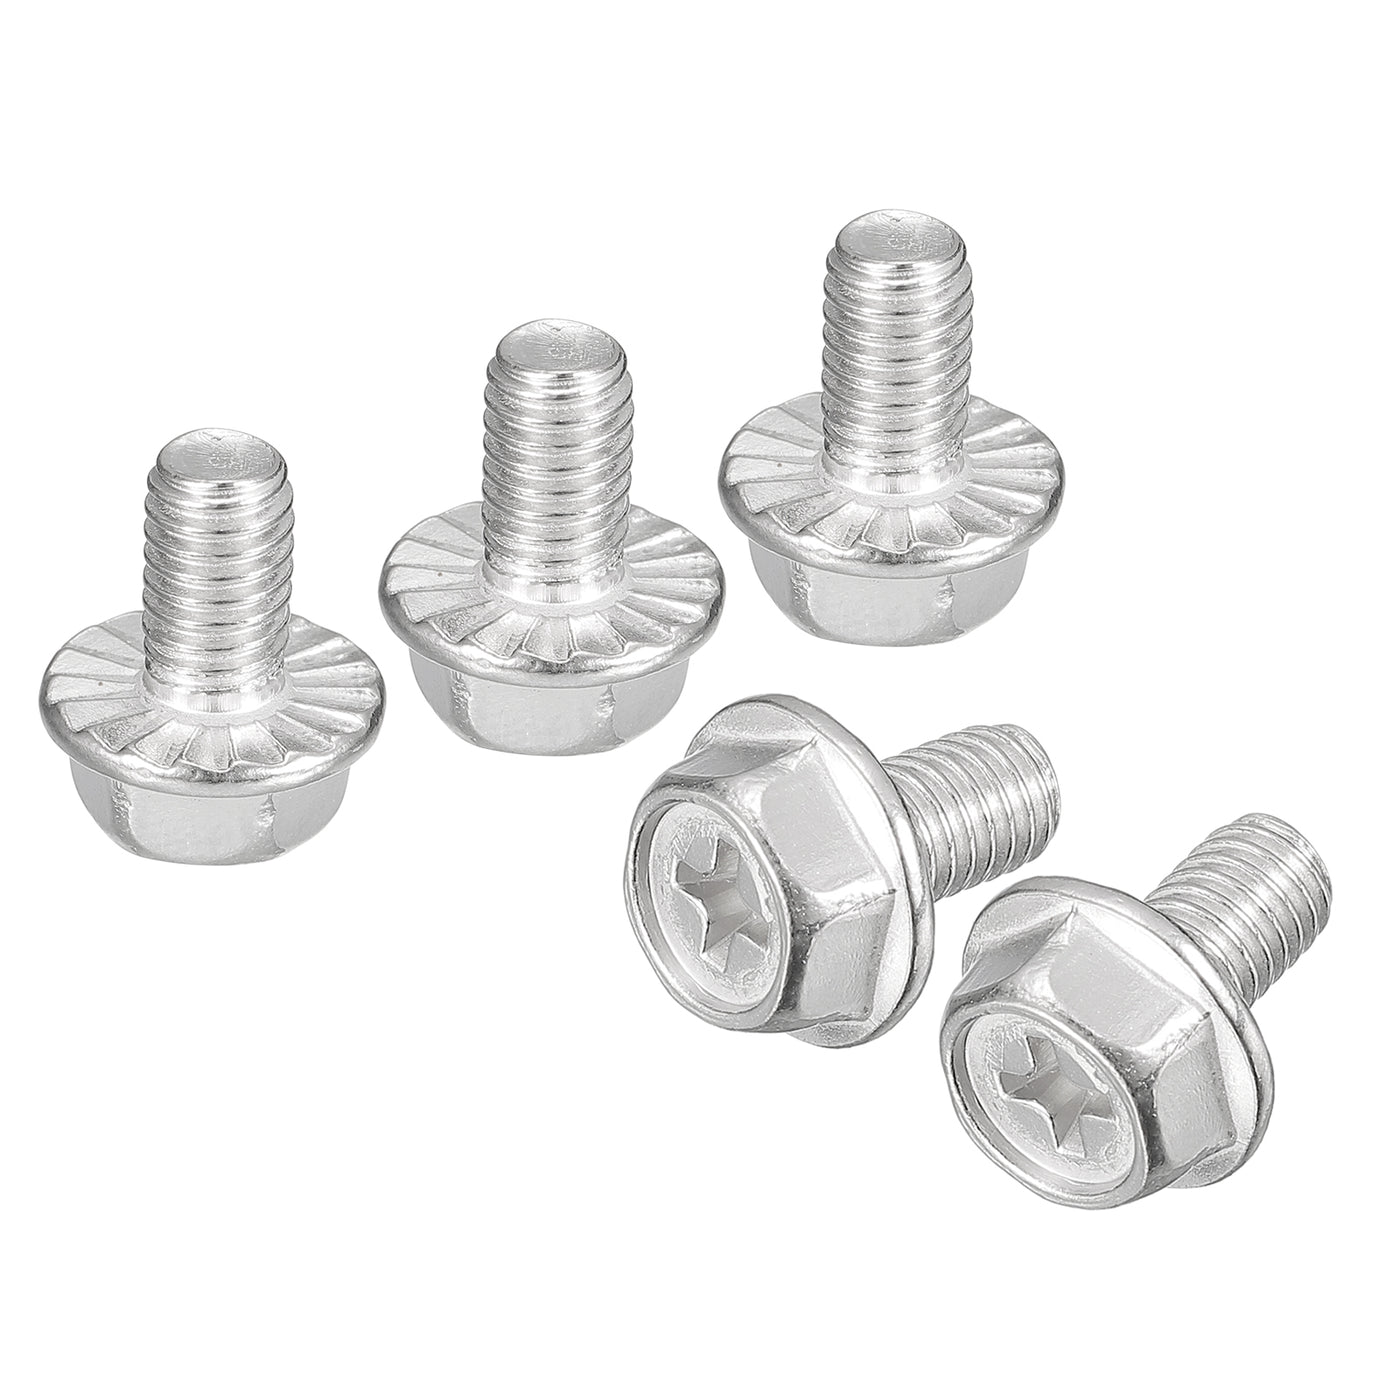 uxcell Uxcell M6x10mm Phillips Hex Head Flange Bolts, 10pcs 304 Stainless Steel Screws